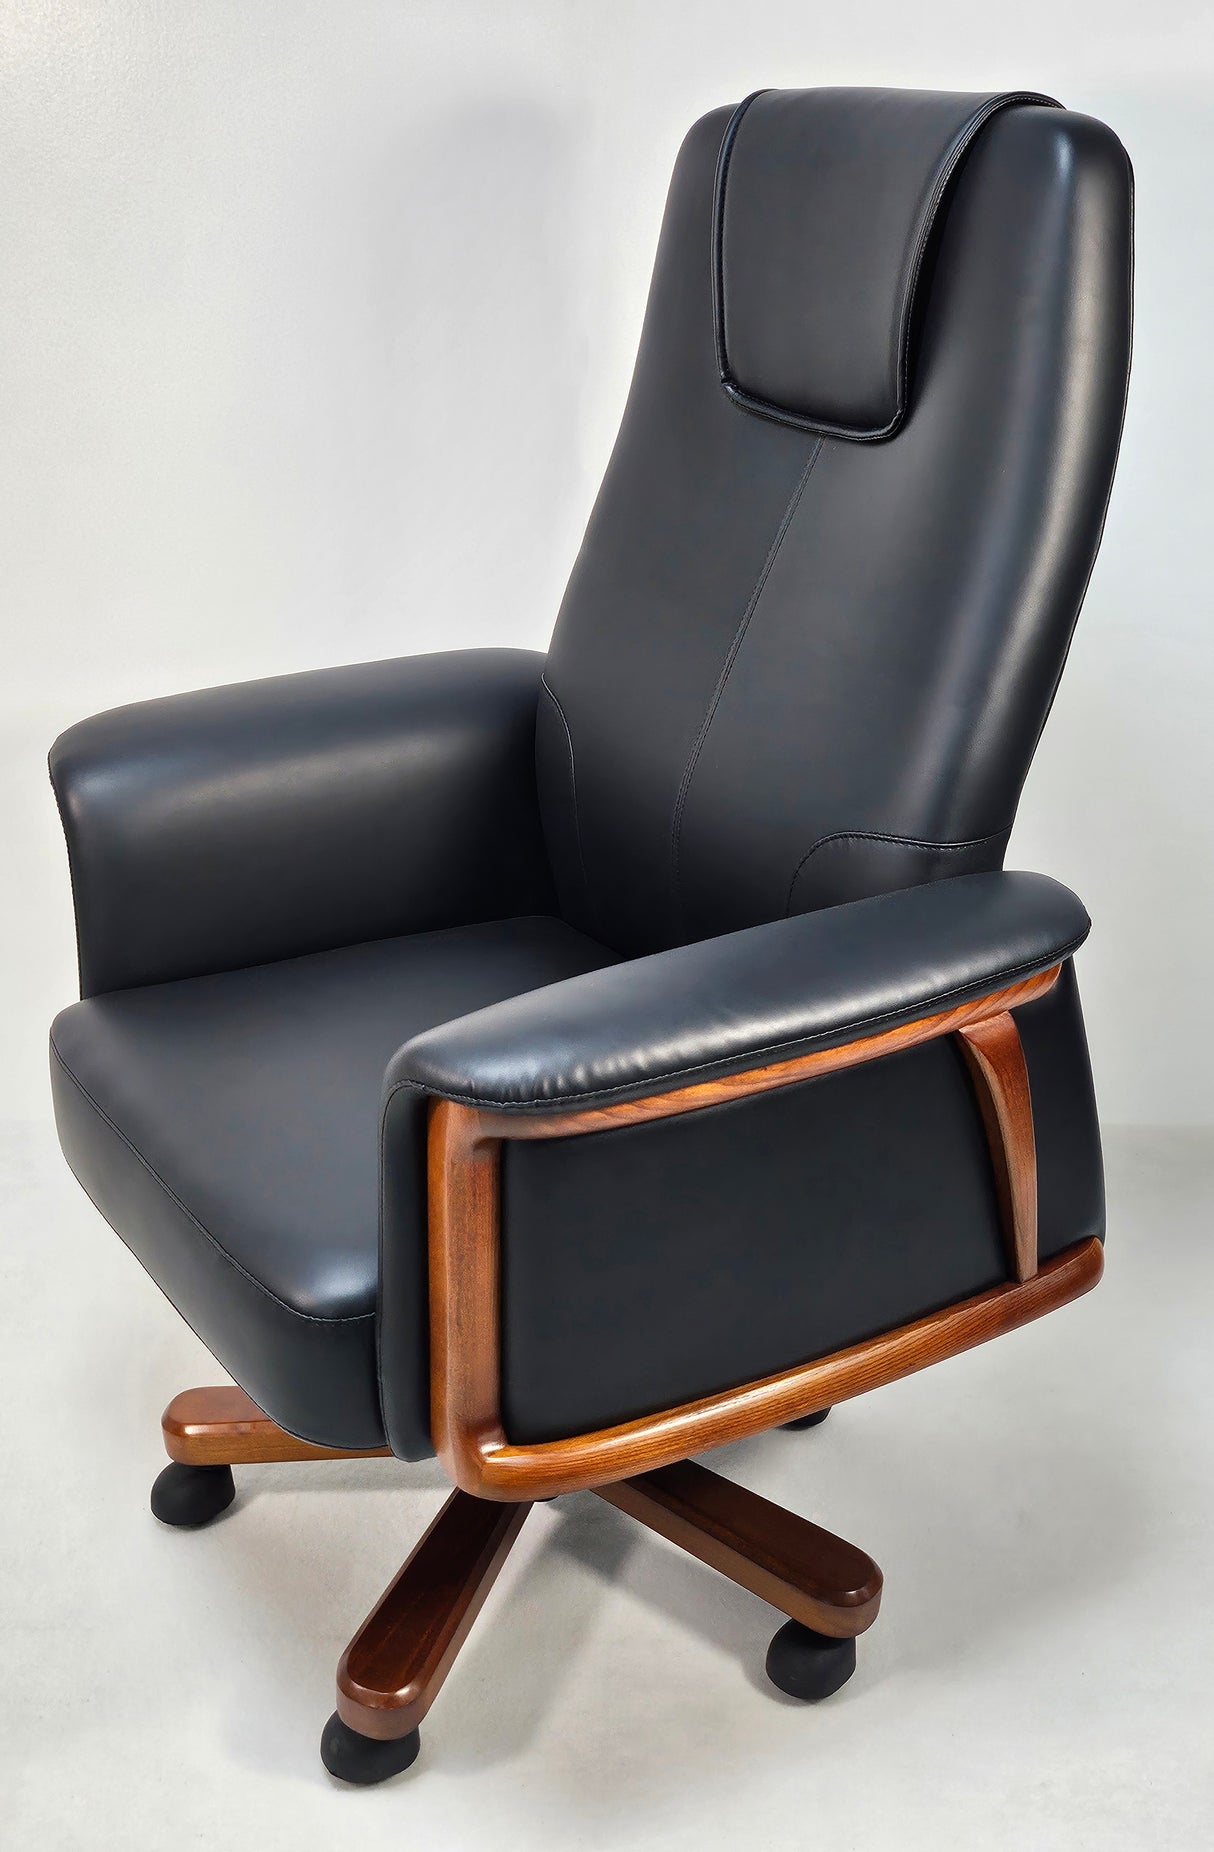 Black Leather Executive Office Chair with Solid Wood Detailing - ZX-006